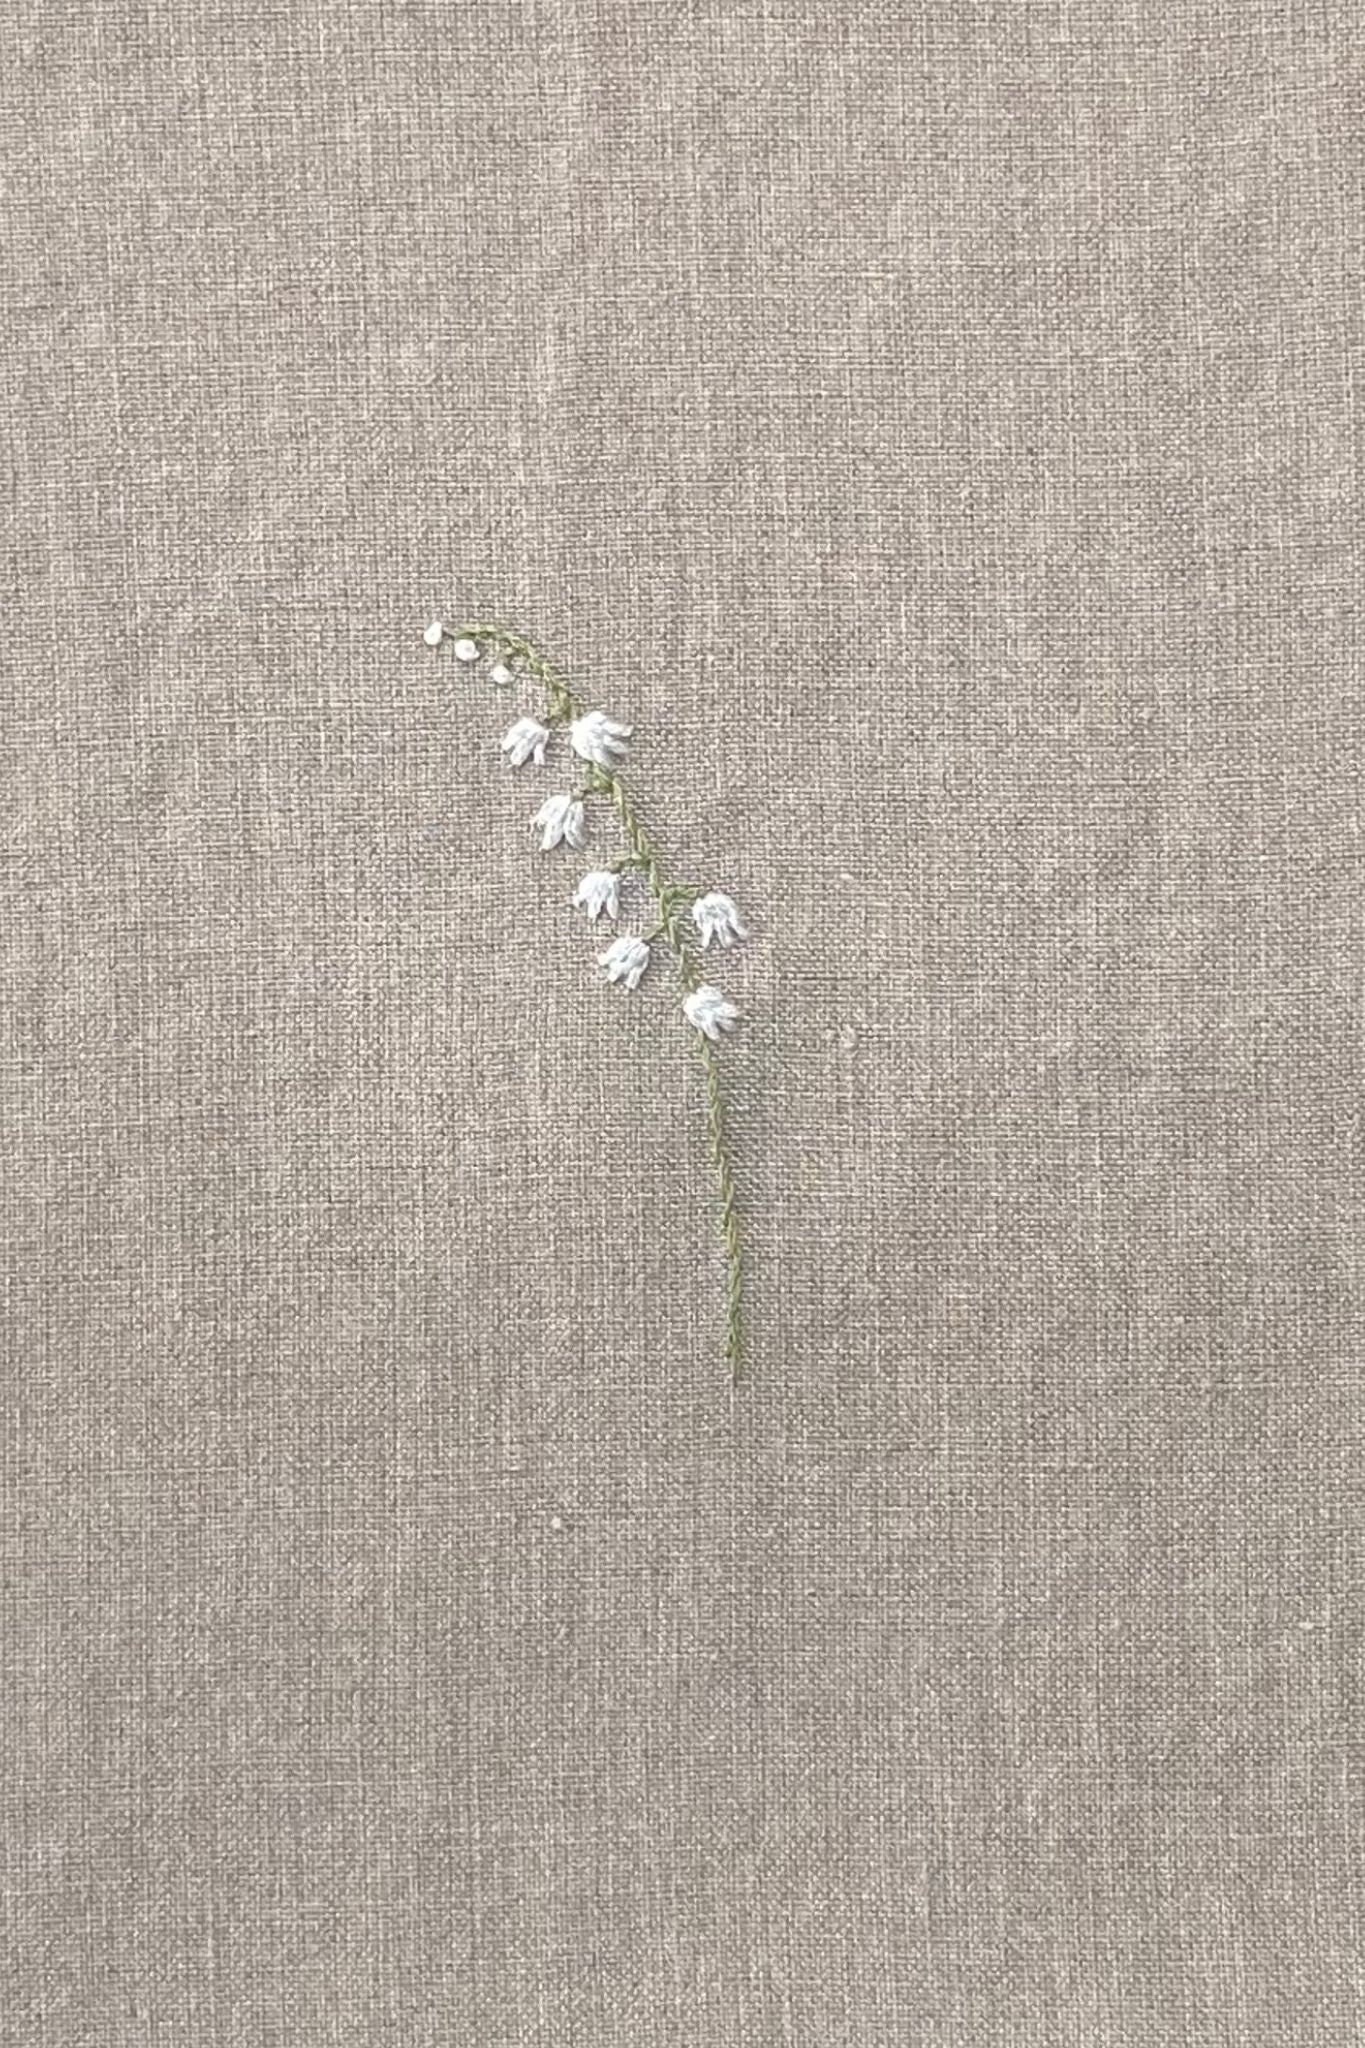 Handmade Embroidery lily of the Valley Blossoms - Etsy